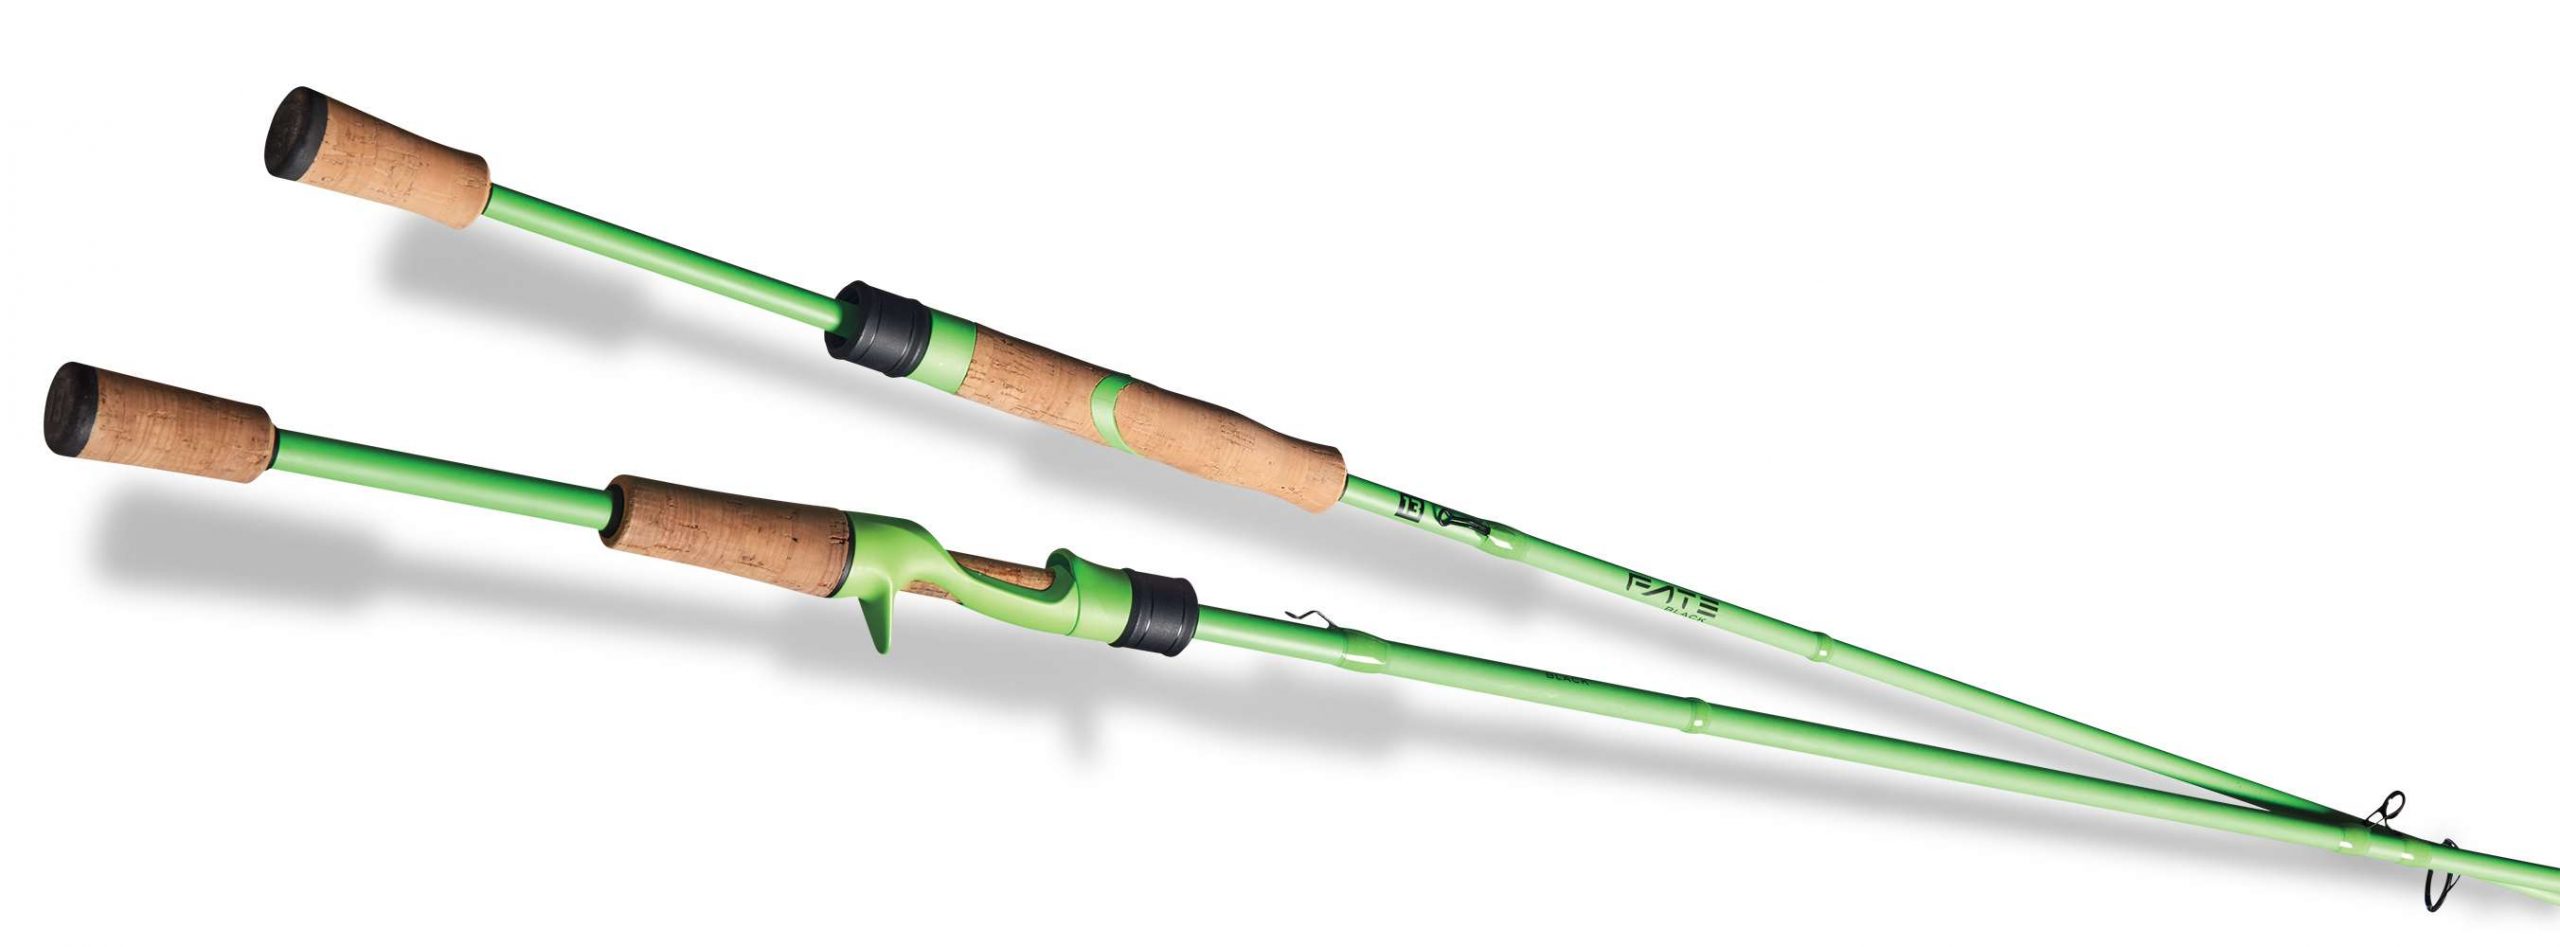 iCAST 2017 Best-In-Show Freshwater Rods<br>
<a href=